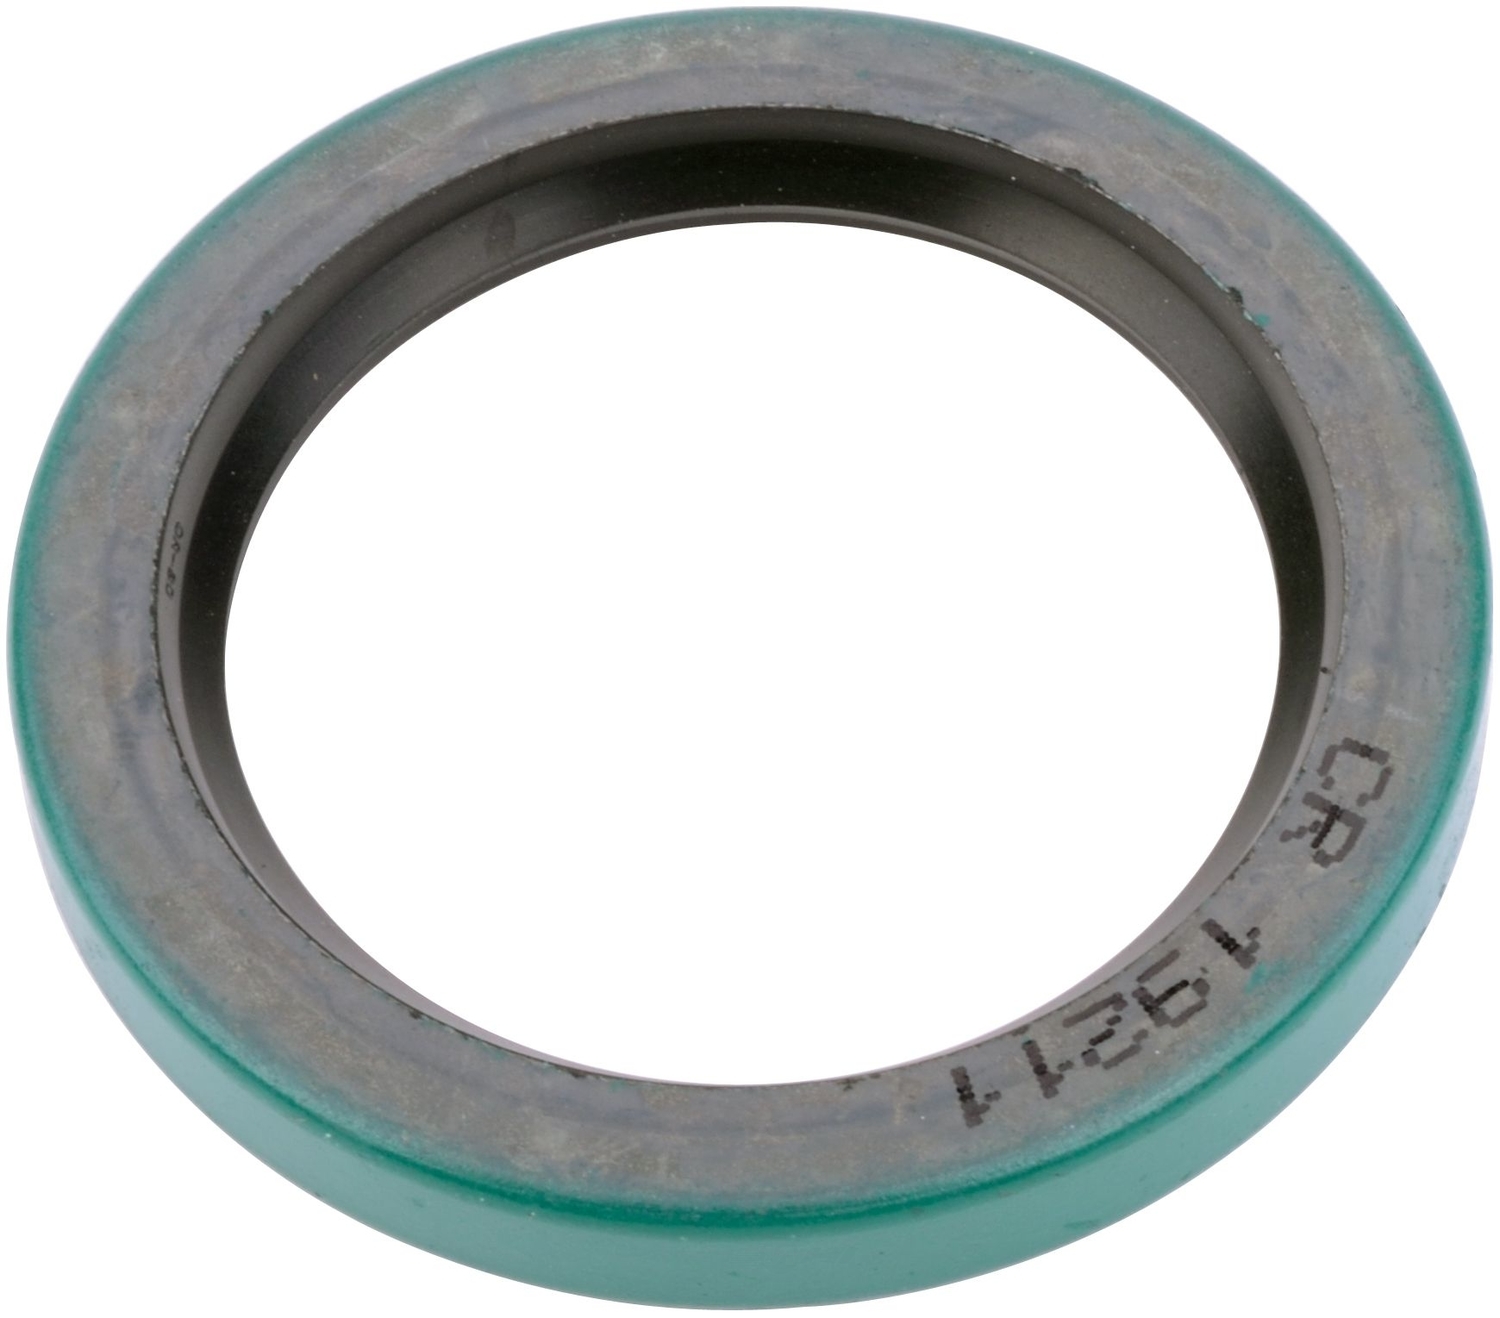 SKF (CHICAGO RAWHIDE) - Auto Trans Adapter Housing Seal - SKF 19211